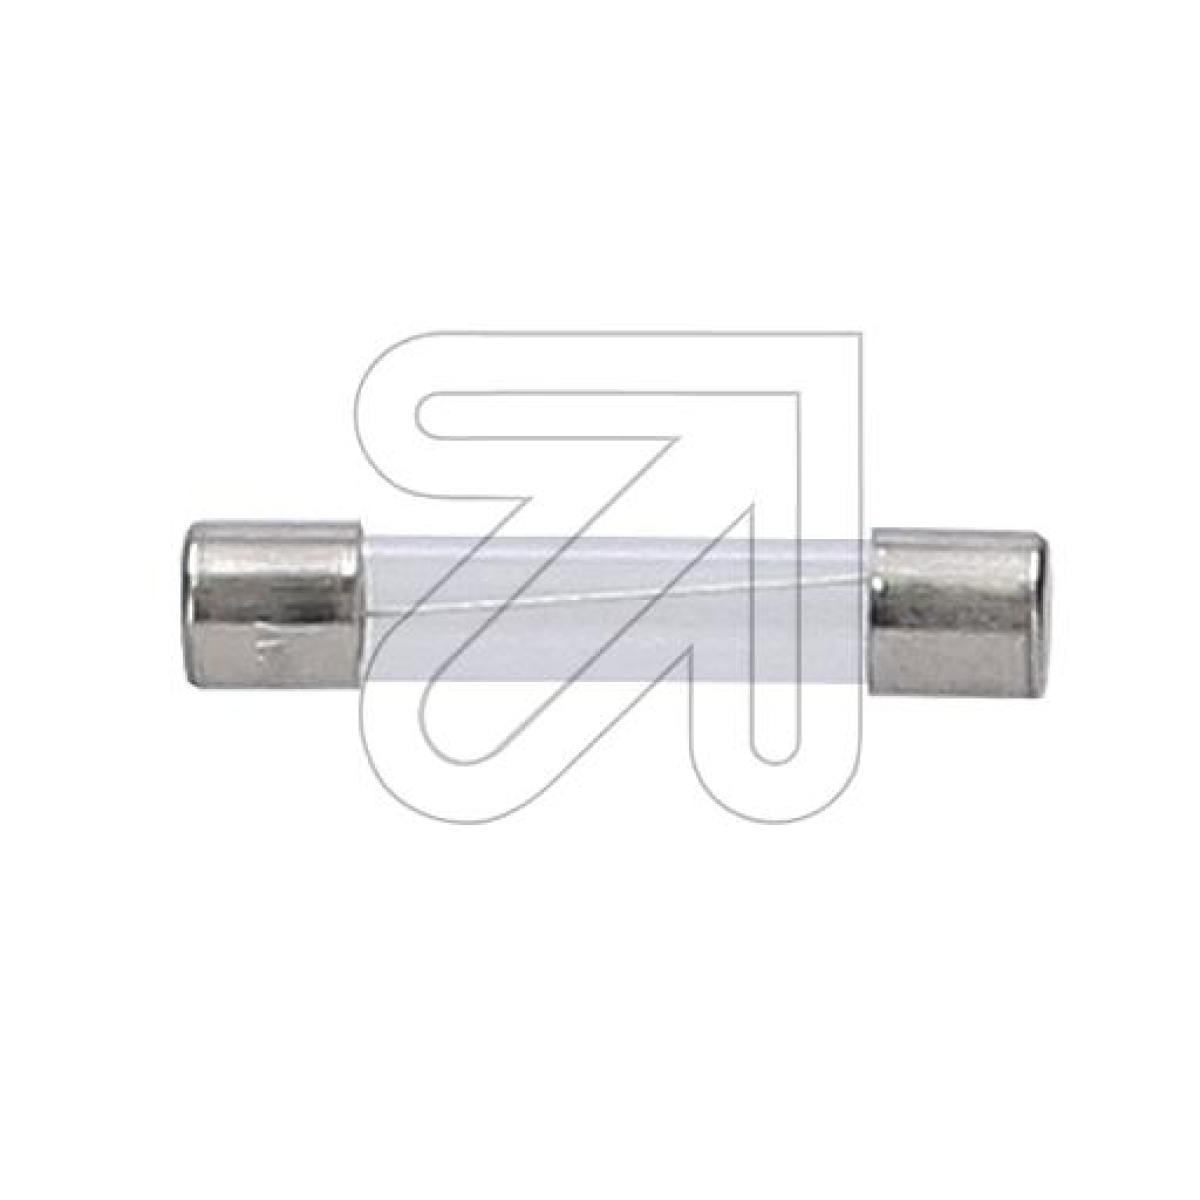 ELUFine-acting fuse, slow-acting 6.3x32 2.0A-Price for 10 pcs.Article-No: 187120